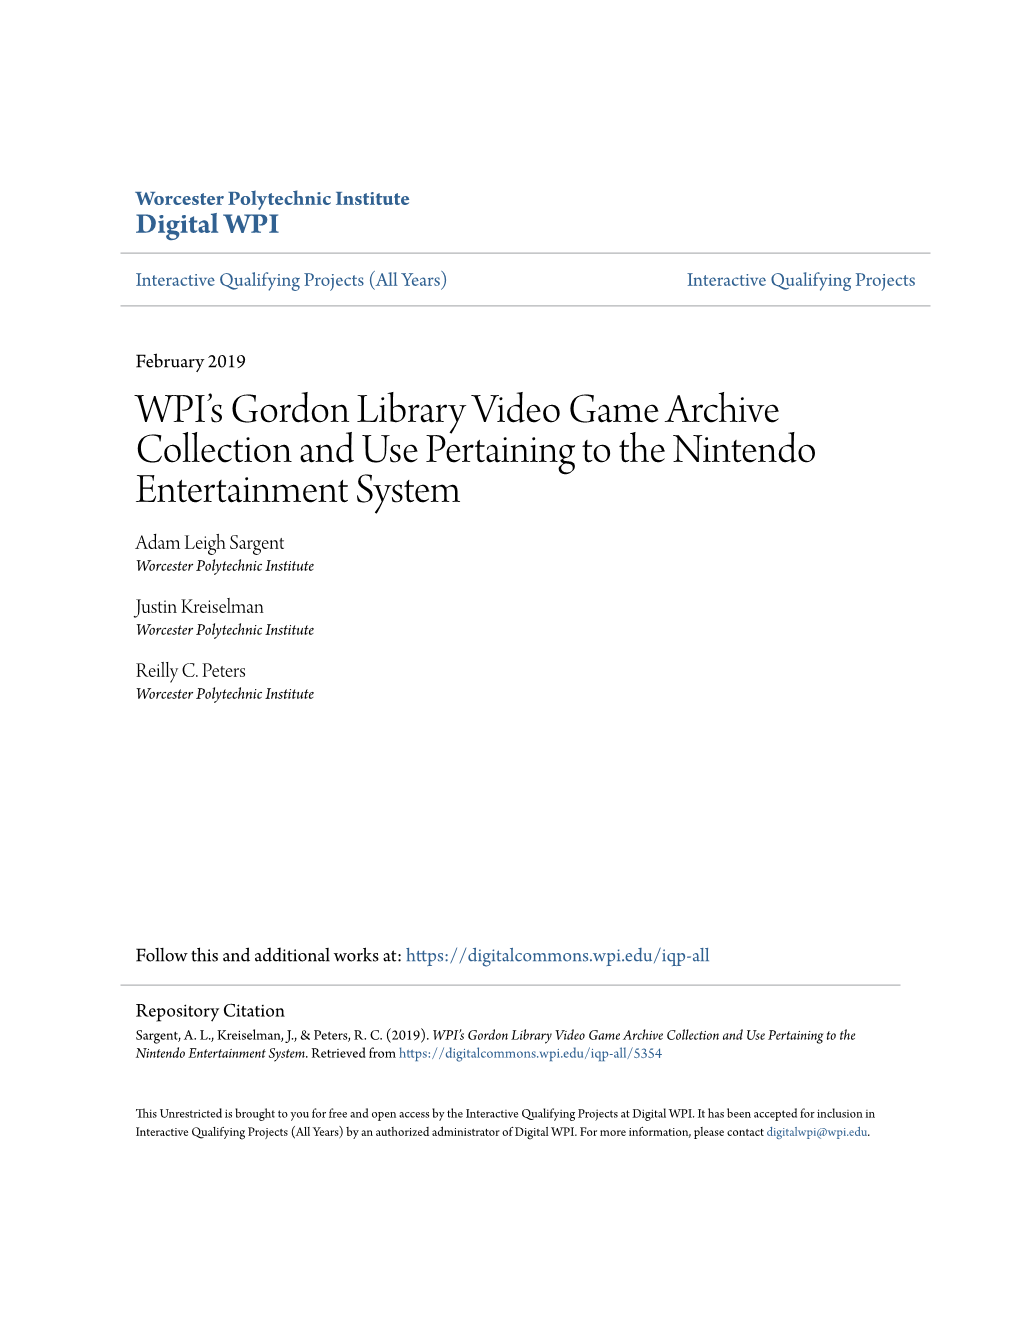 Wpiâ•Žs Gordon Library Video Game Archive Collection and Use